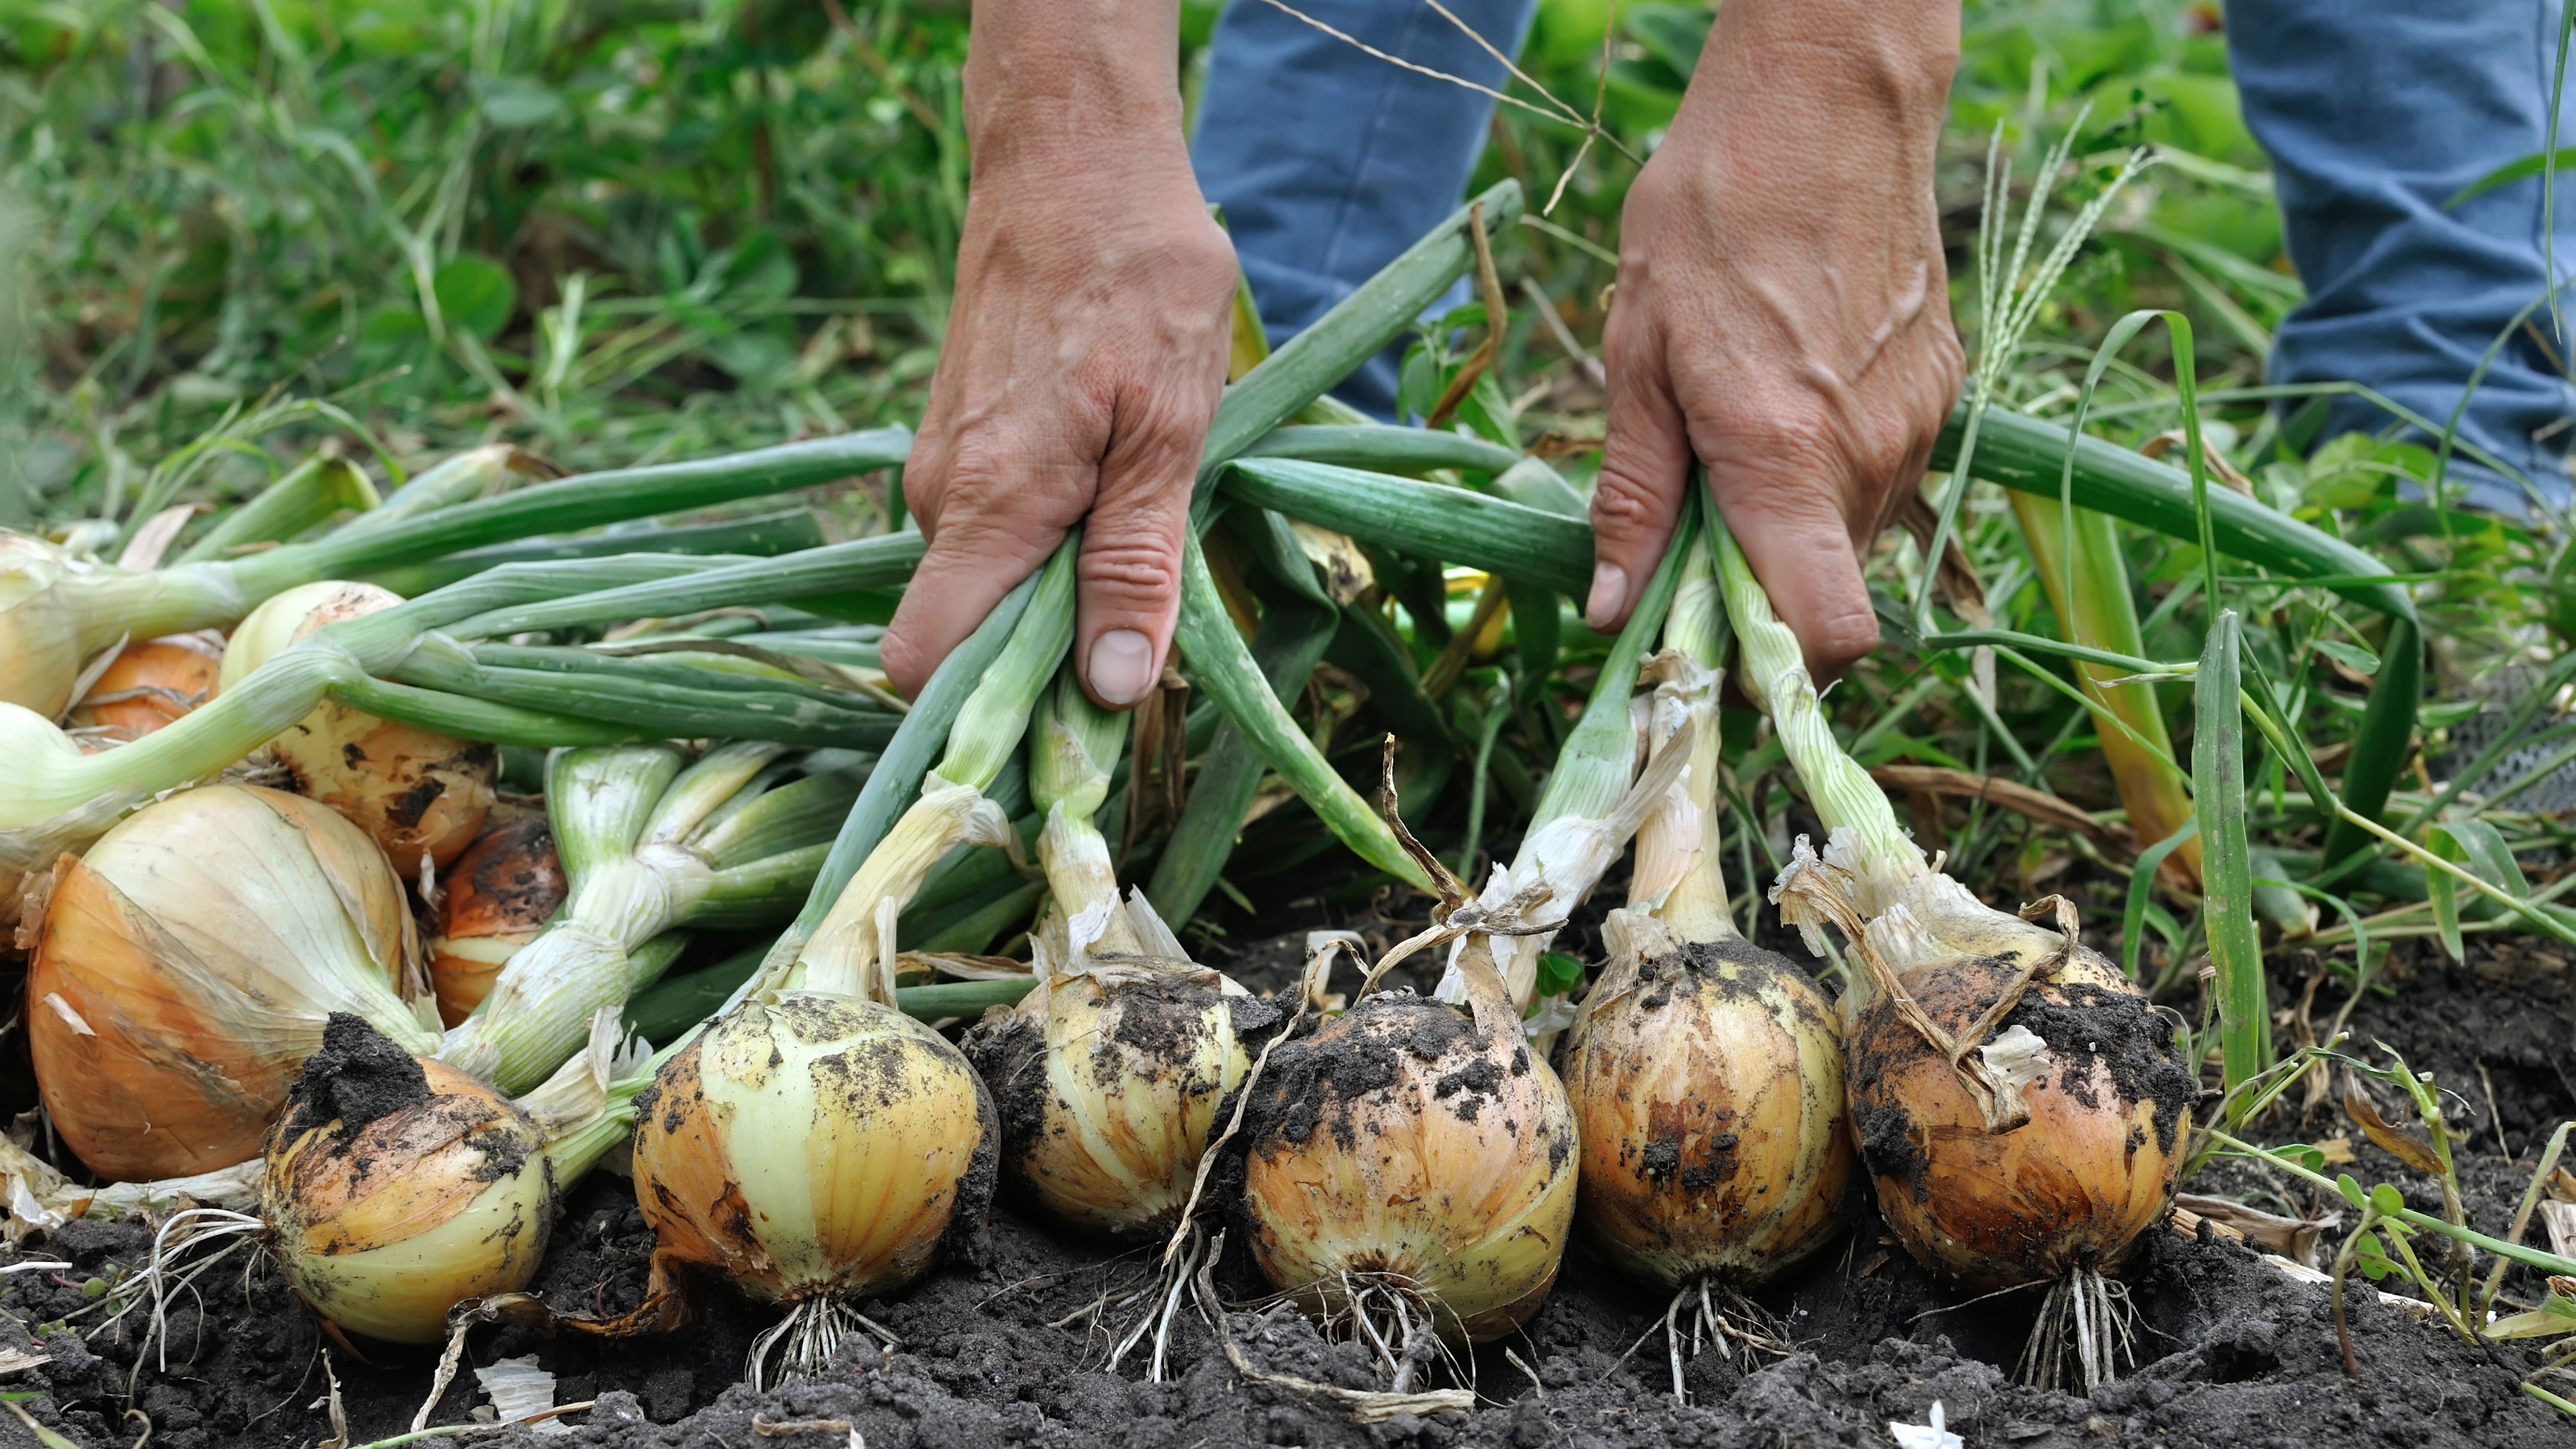 Image of Planting onions and tomatoes together image 1